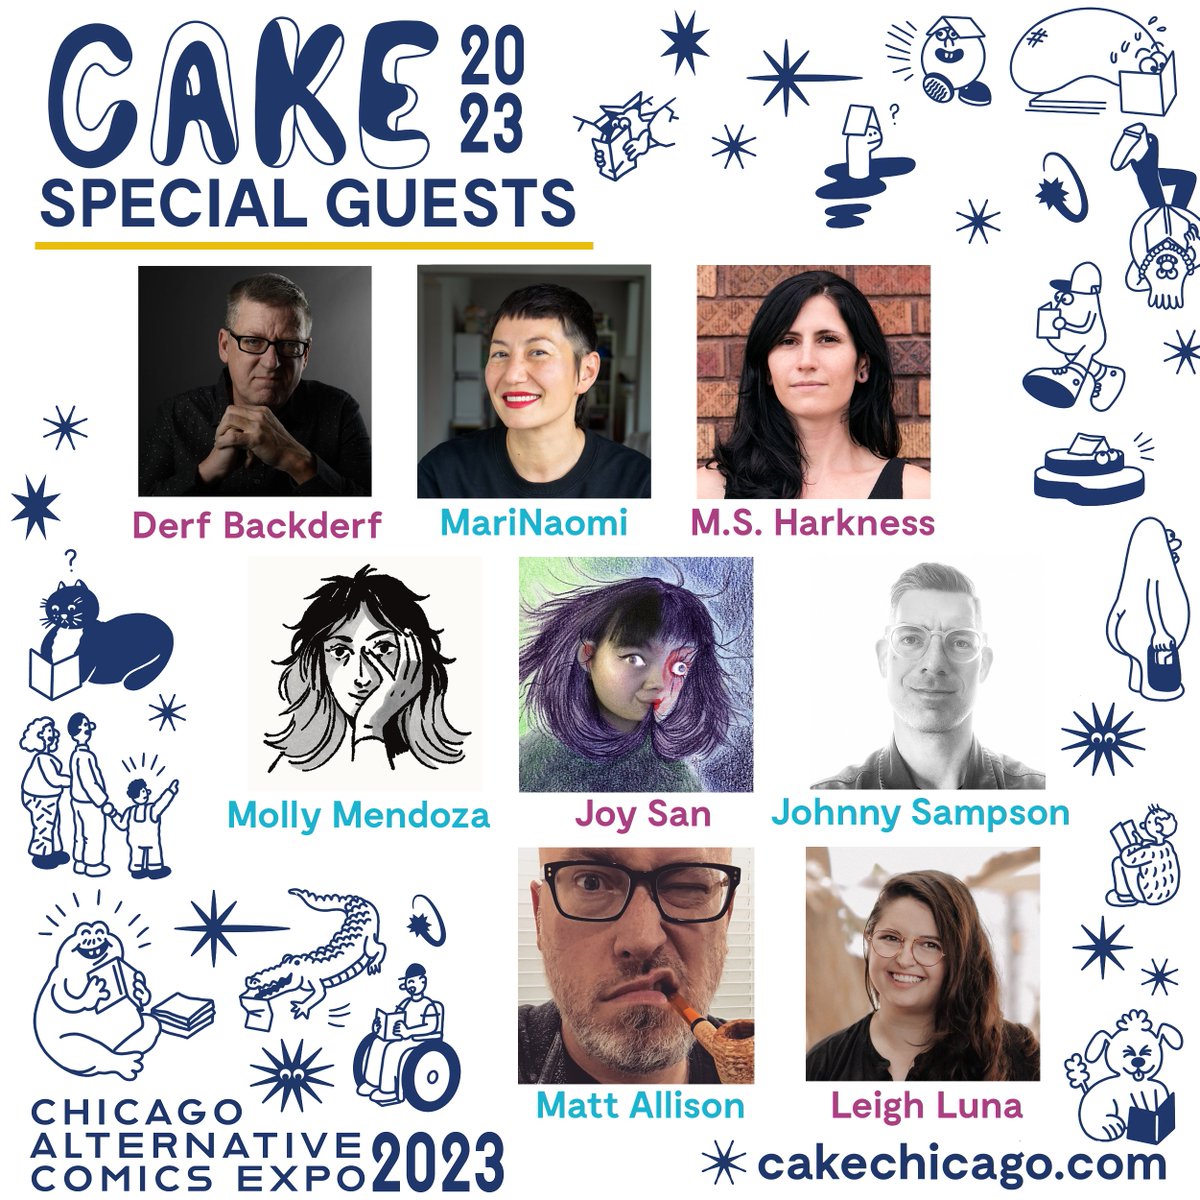 We're so excited to be hosting such a wide range of Special Guests who highlight the visual and narrative variety alternative comics to offer. Visit @DerfBackderf @marinaomi @msharkness @thisismollym @sexytuna @johnnysampson @MatthewGAllison & @ourobora June 3 & 4 at CAKE 2023!🎂